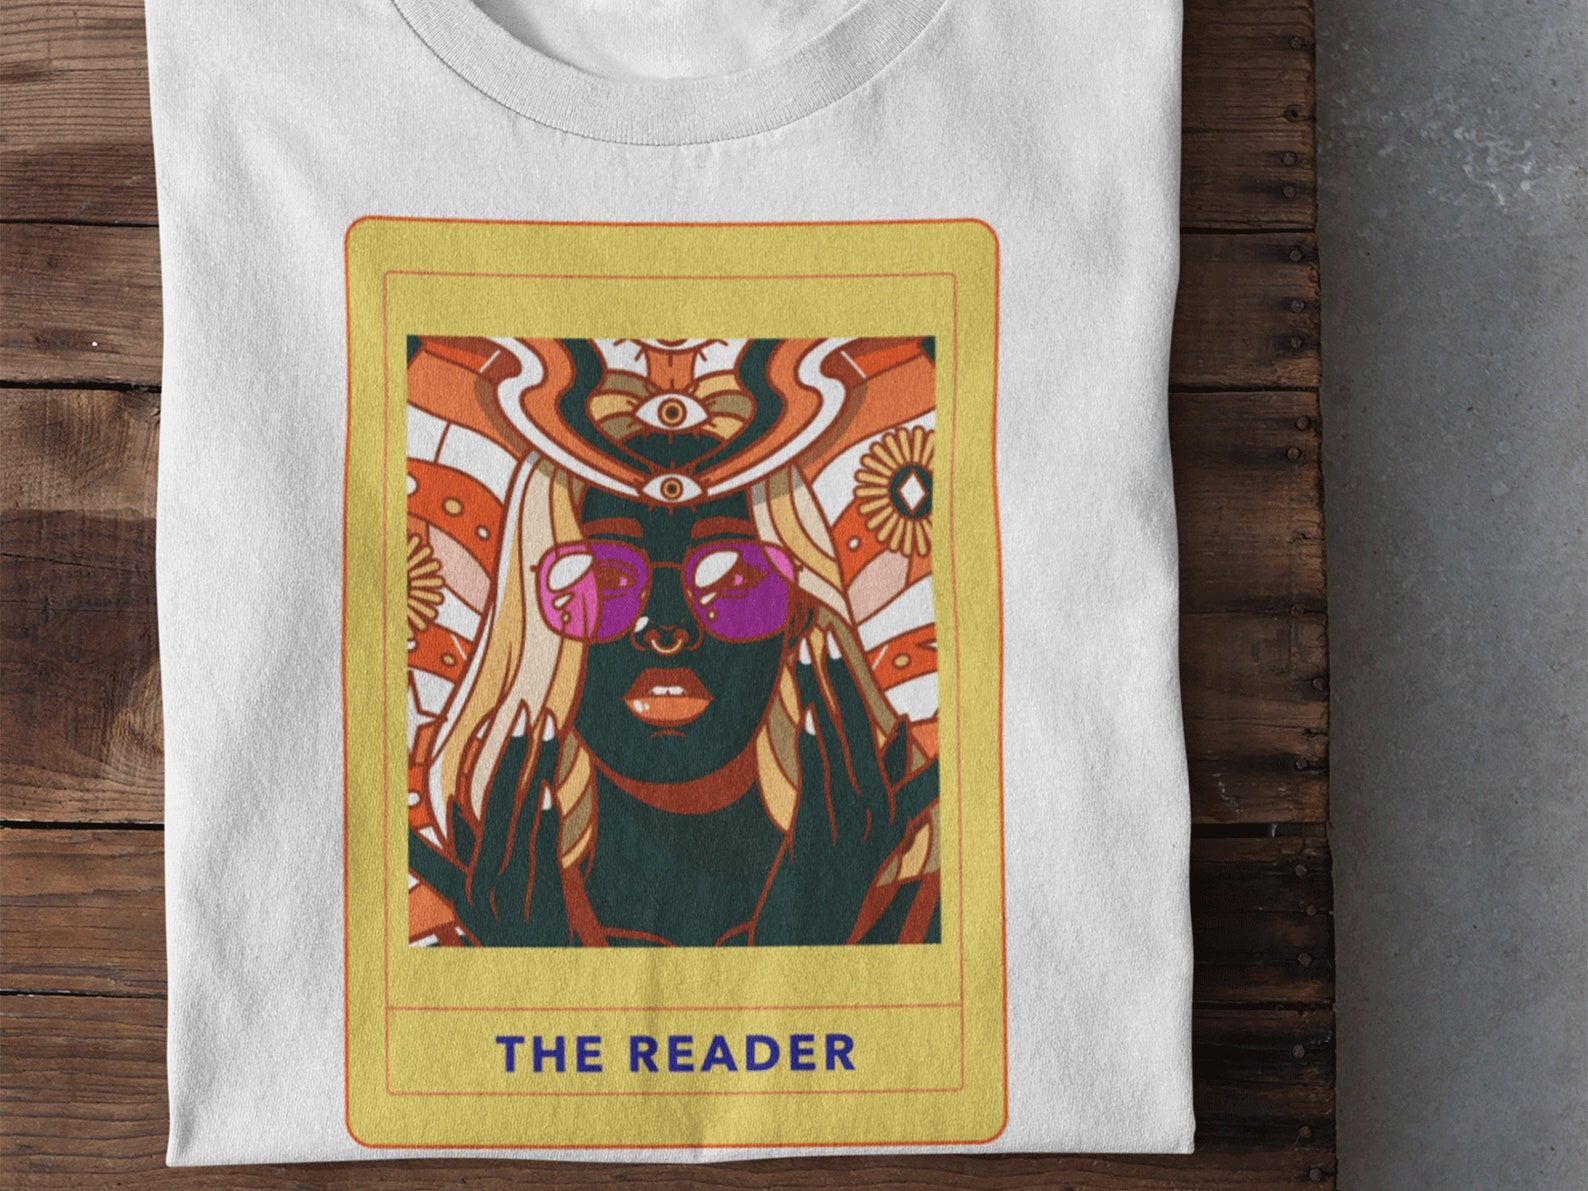 Image of a white tee, featuring "The Reader" card in the middle. The card features a Black skinned person with vintage 70s styling. 